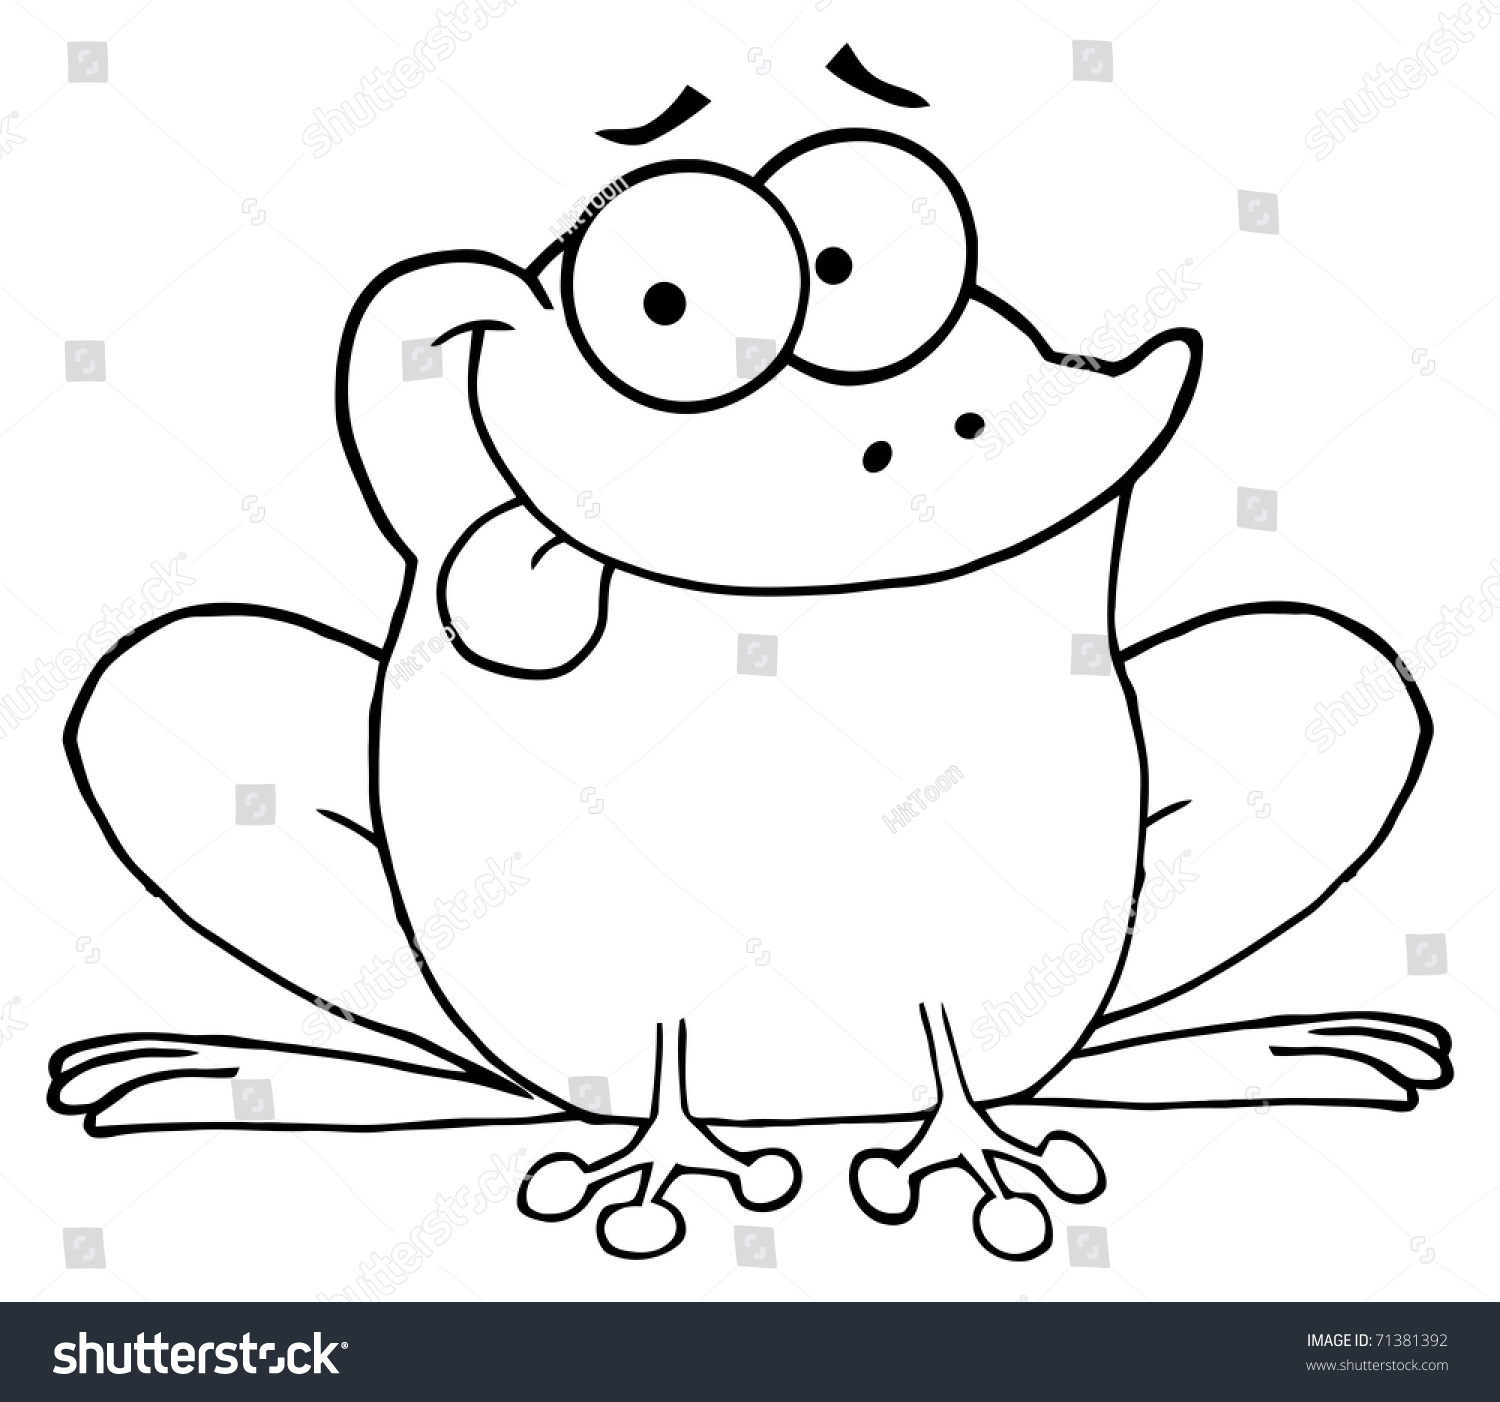 Outlined Happy Frog Cartoon Character Stock Vector Illustration